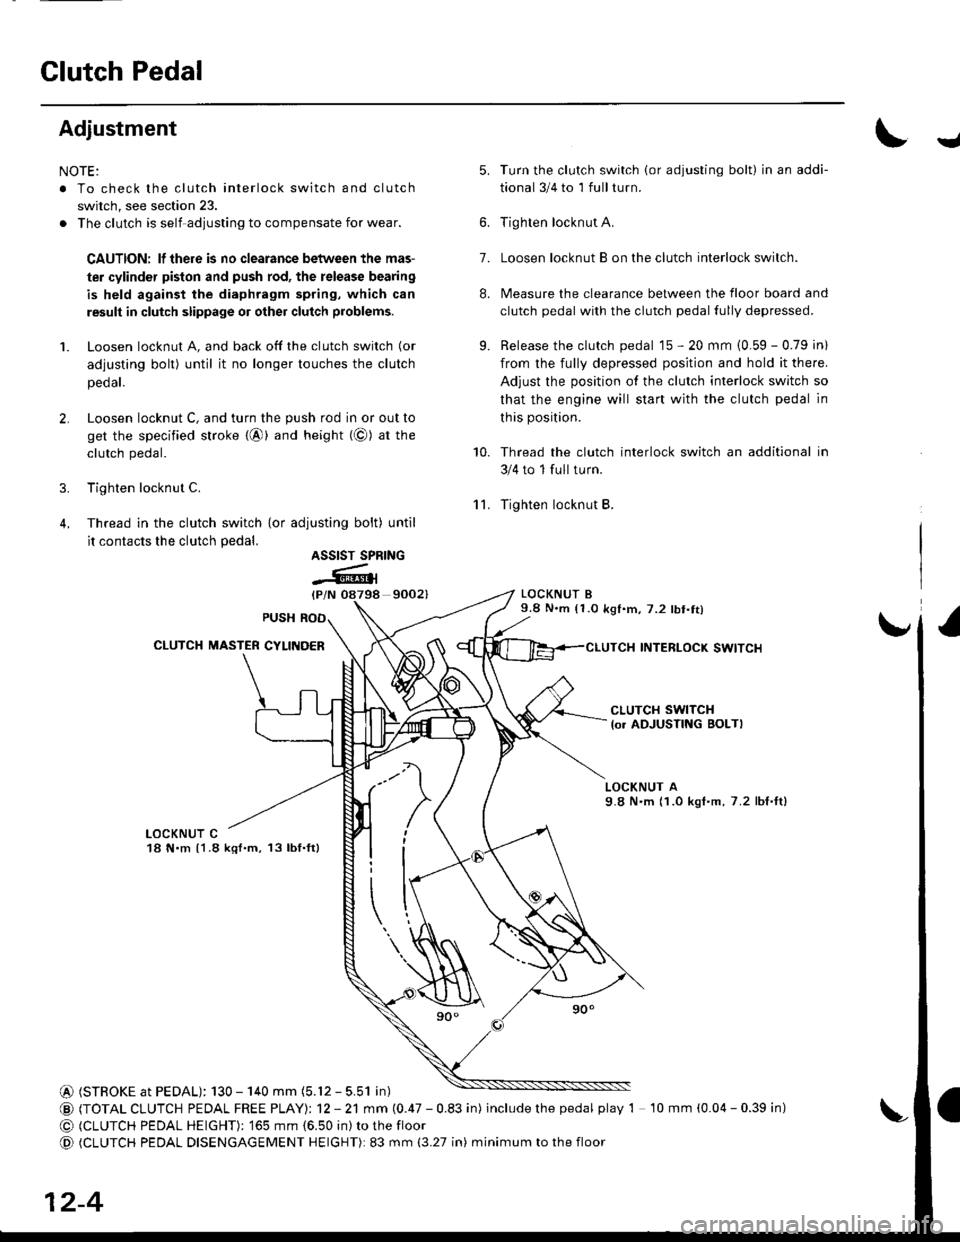 HONDA CIVIC 1999 6.G Workshop Manual Glutch Pedal
Adjustment
NOTE:
. To check the clutch interlock switch and clutch
switch, see section 23.
. The clutch is self-adjusting to compensate for wear.
CAUTION: lf there is no clearance between